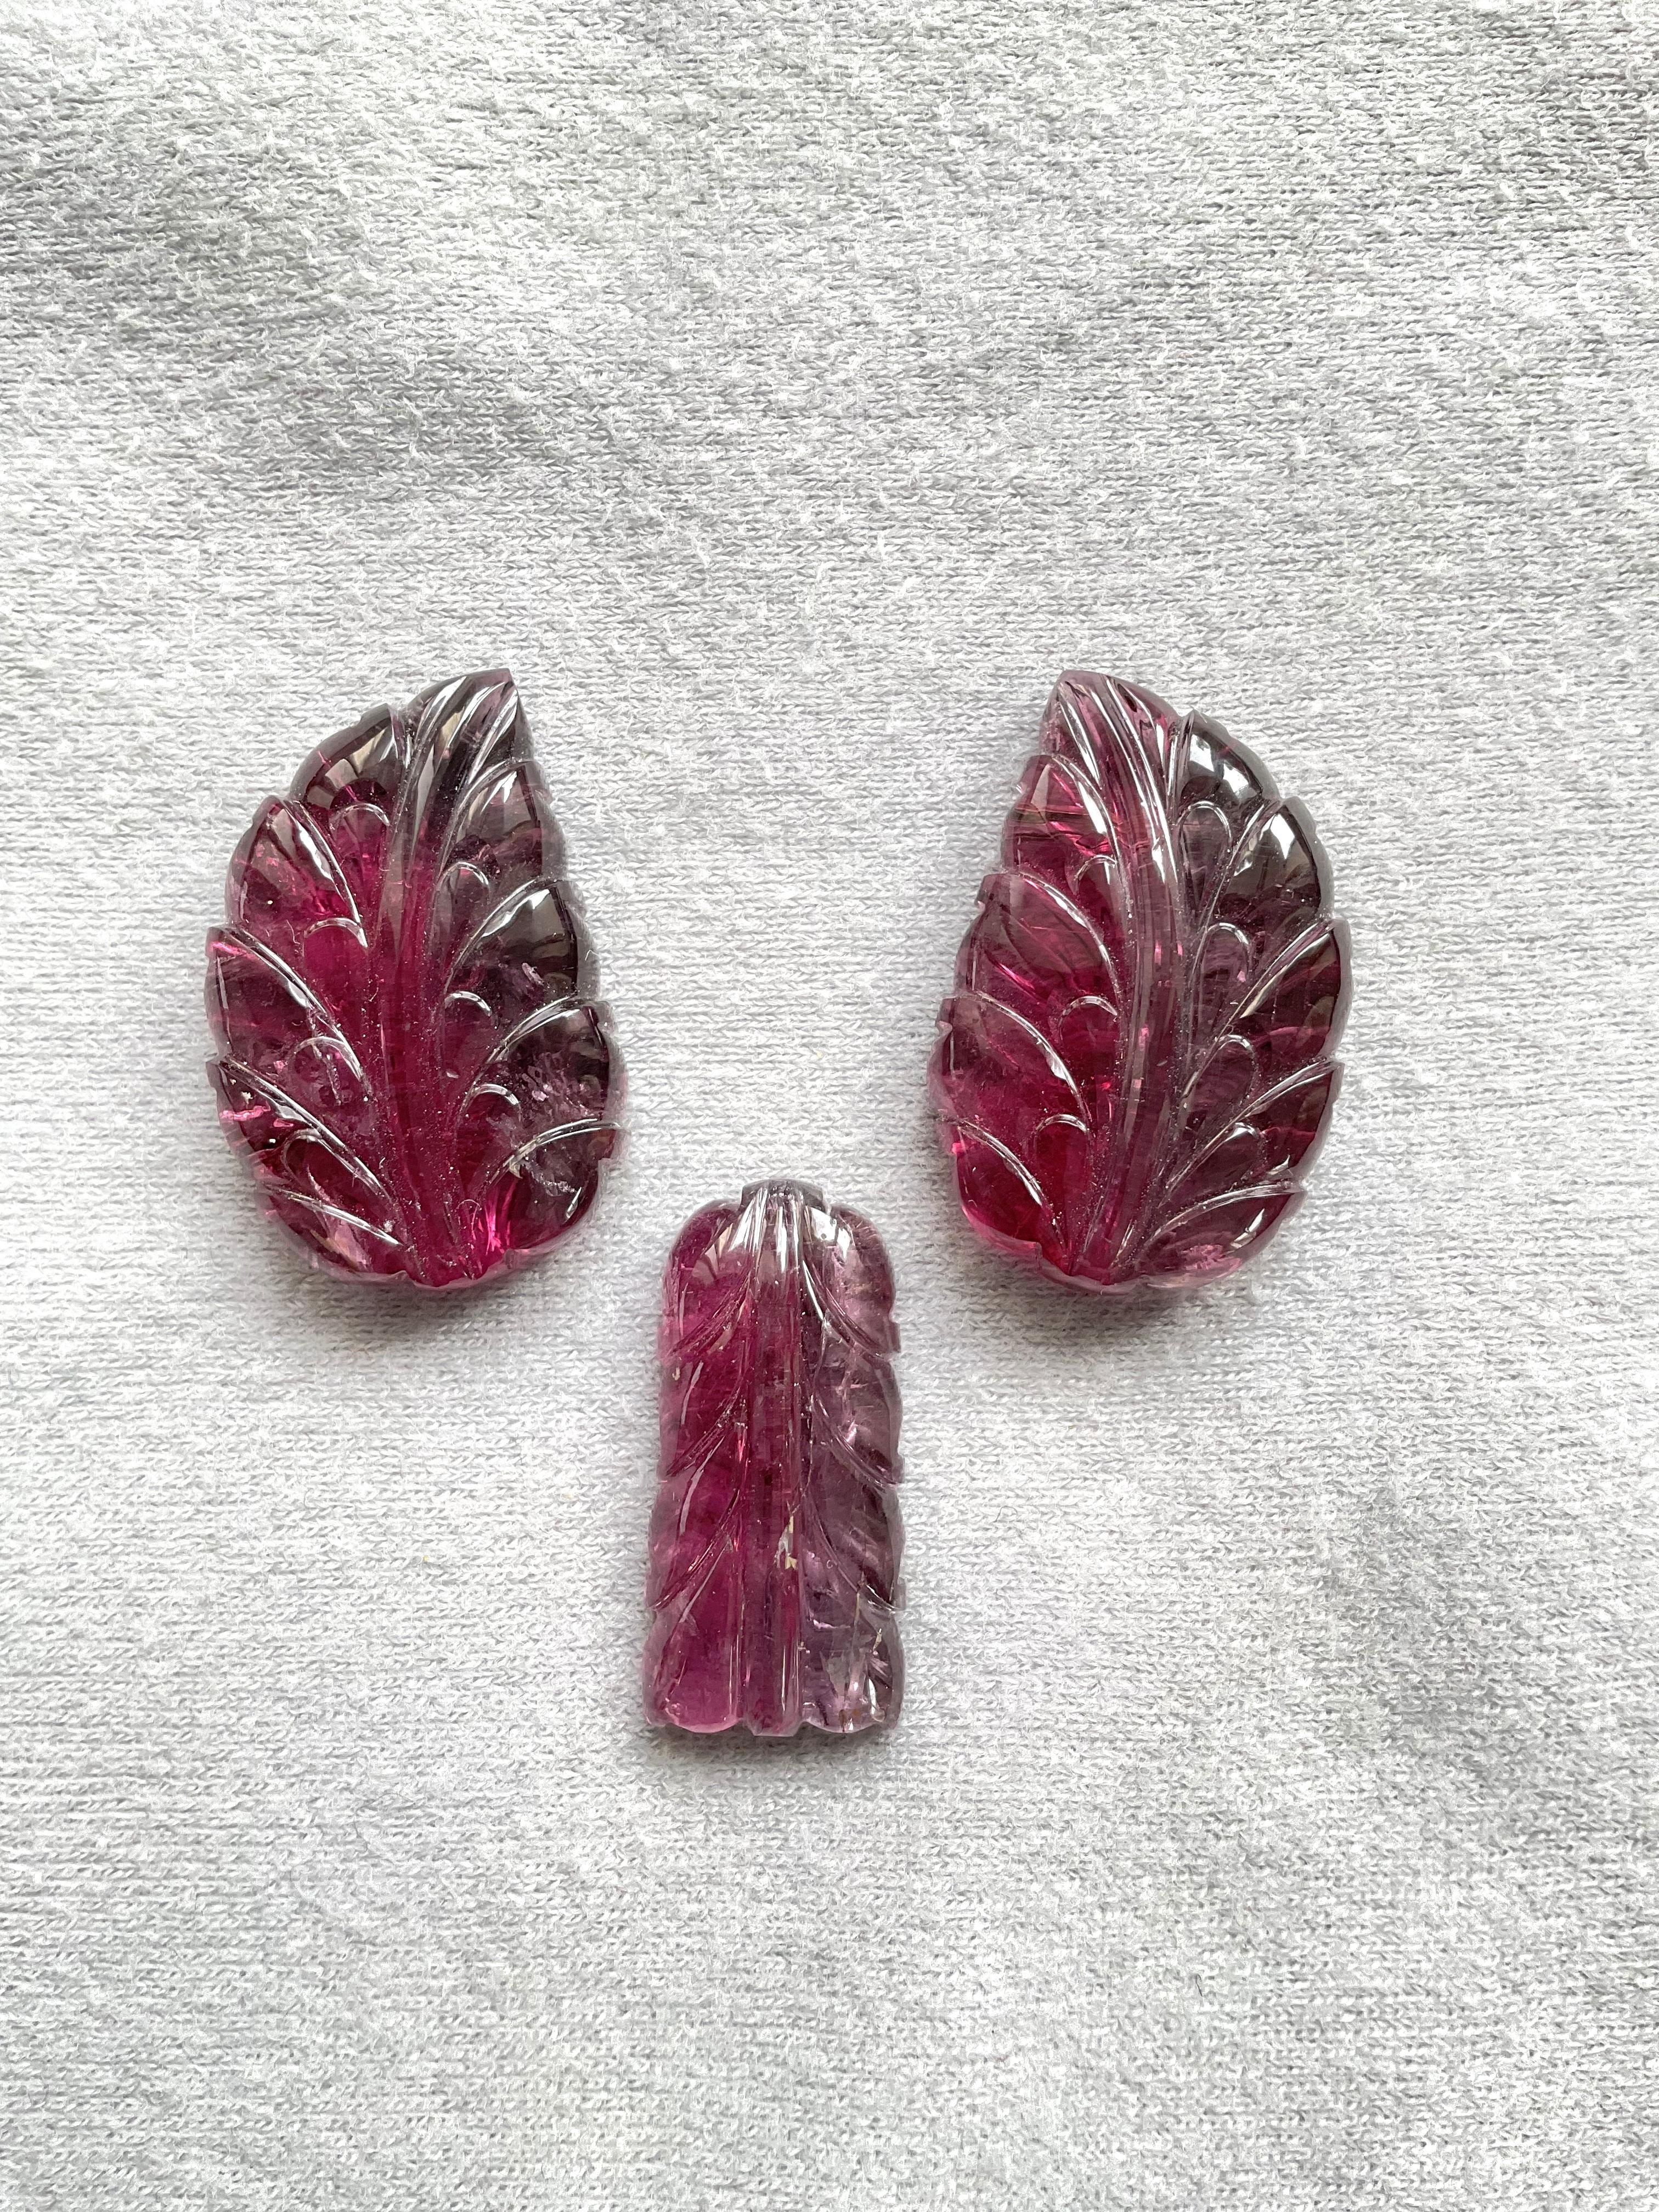 84.37 Carats Rubellite Tourmaline Carved Leaf 3 Pieces Fine jewelry Natural Gem For Sale 1